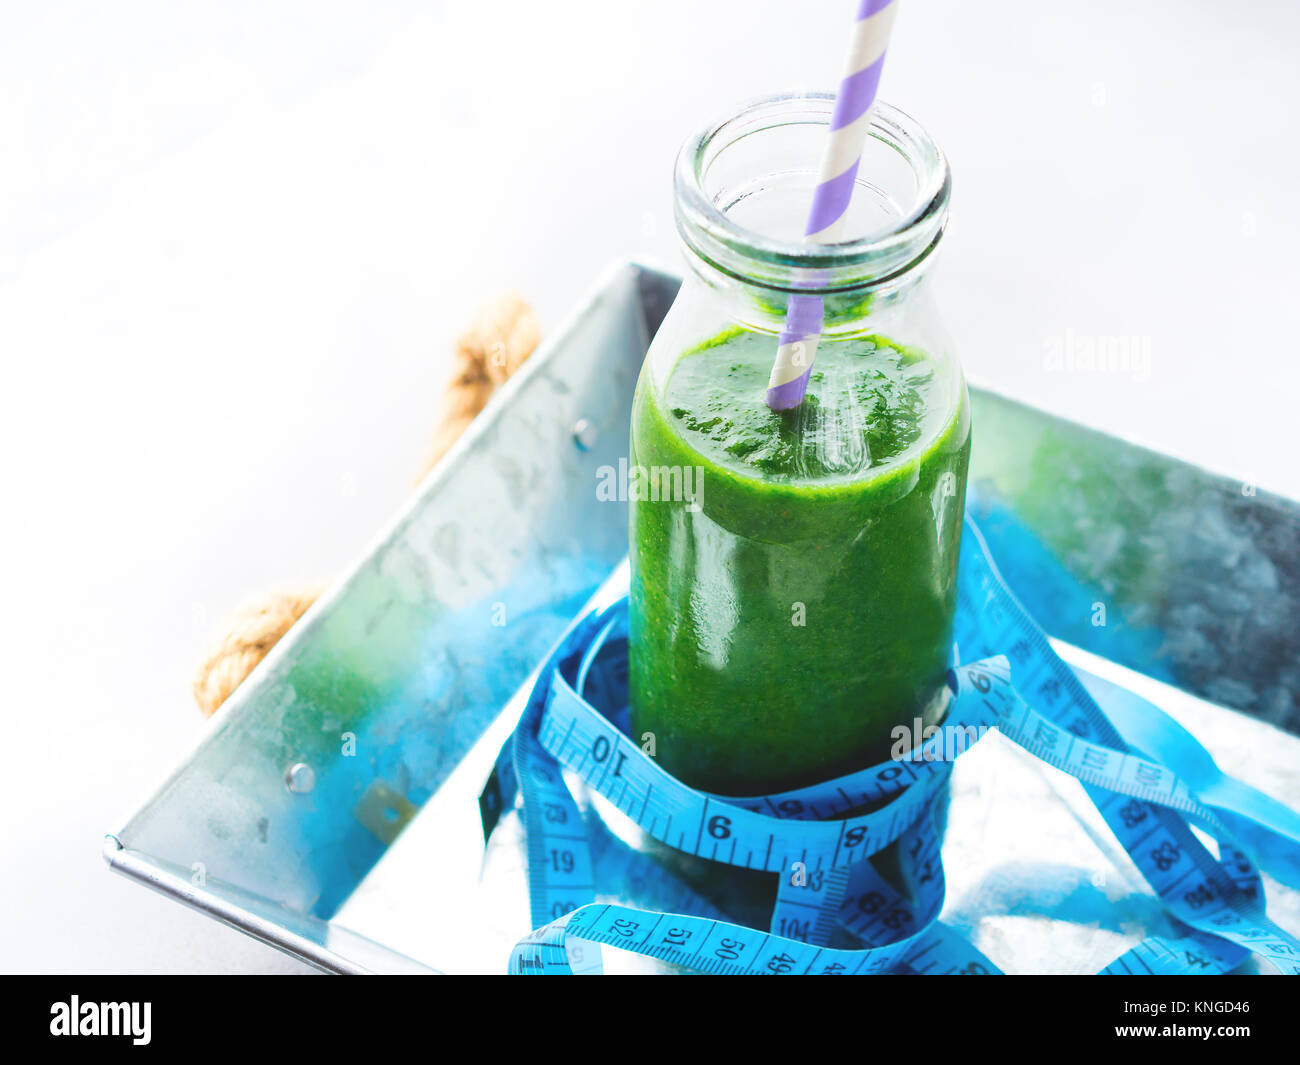 Healthy food diet lose weight concept green smoothie breakfast on gray tray with blue measuring meter. Fruit vegetable juice glass bottle. Stock Photo